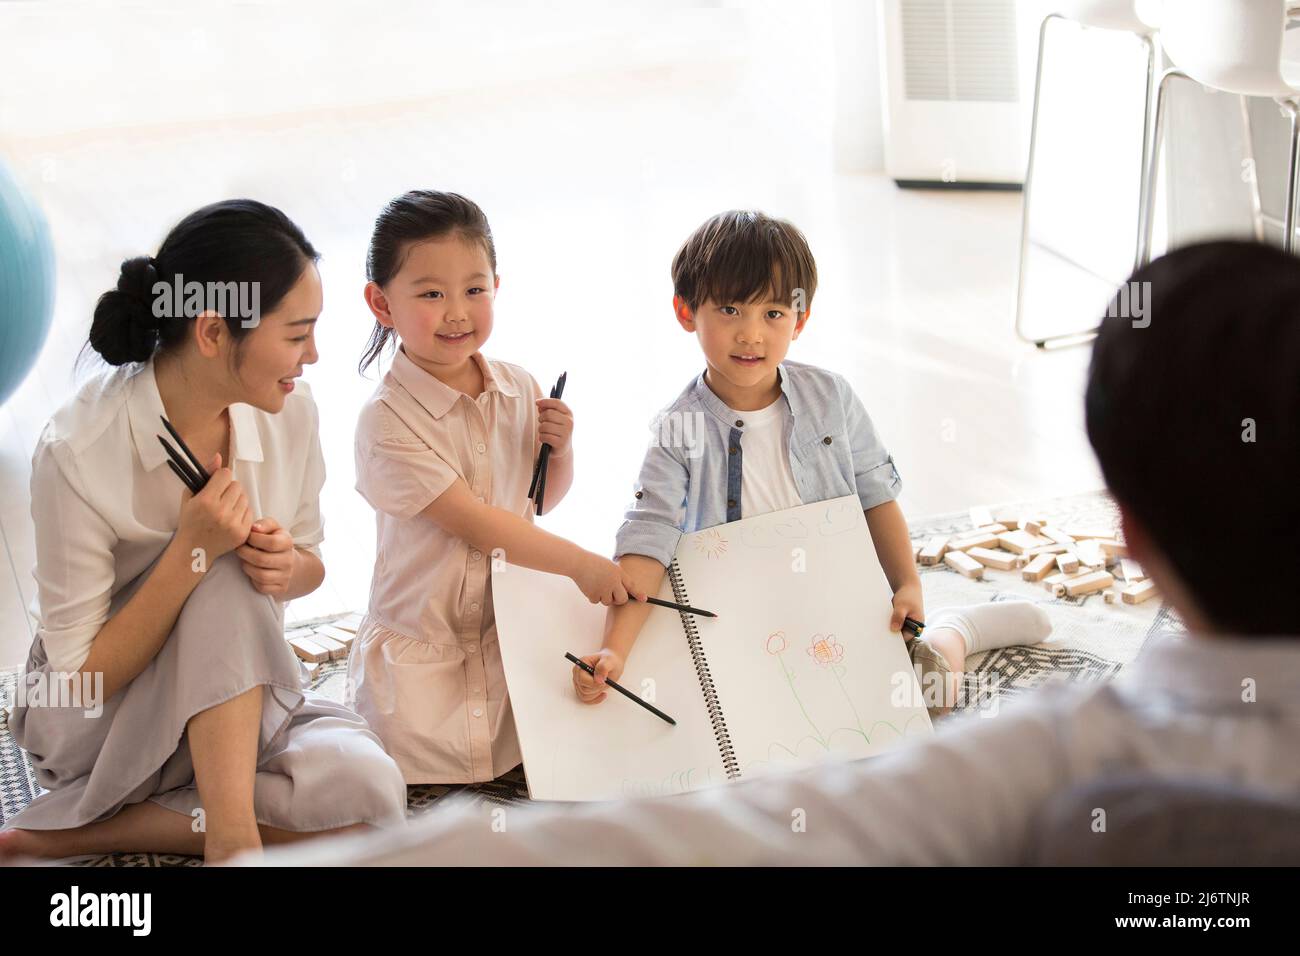 A boy and girl tell their father about their children's drawings, while their mother looks on in delight - stock photo Stock Photo